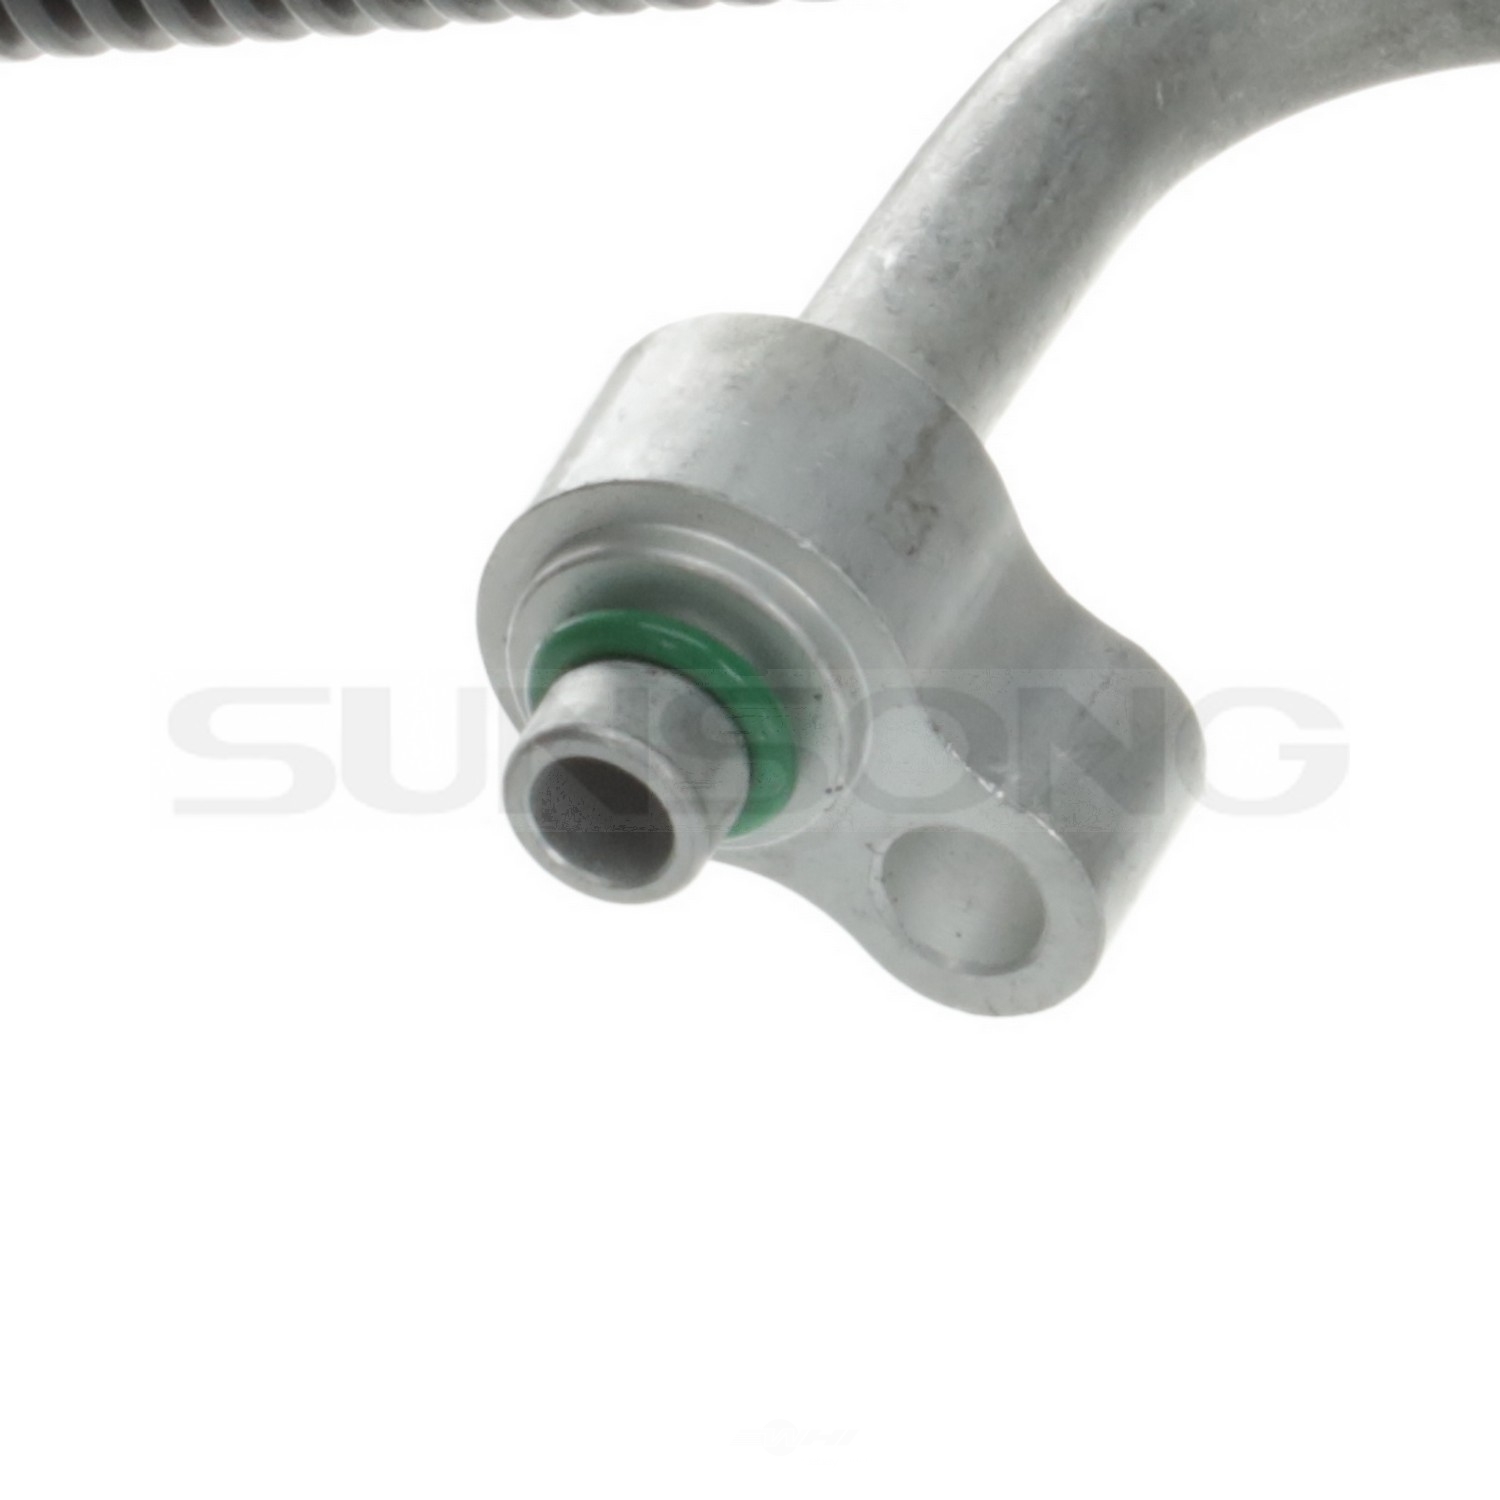 SUNSONG NORTH AMERICA - A/C Refrigerant Discharge / Suction Hose Assembly - SUG 5203009